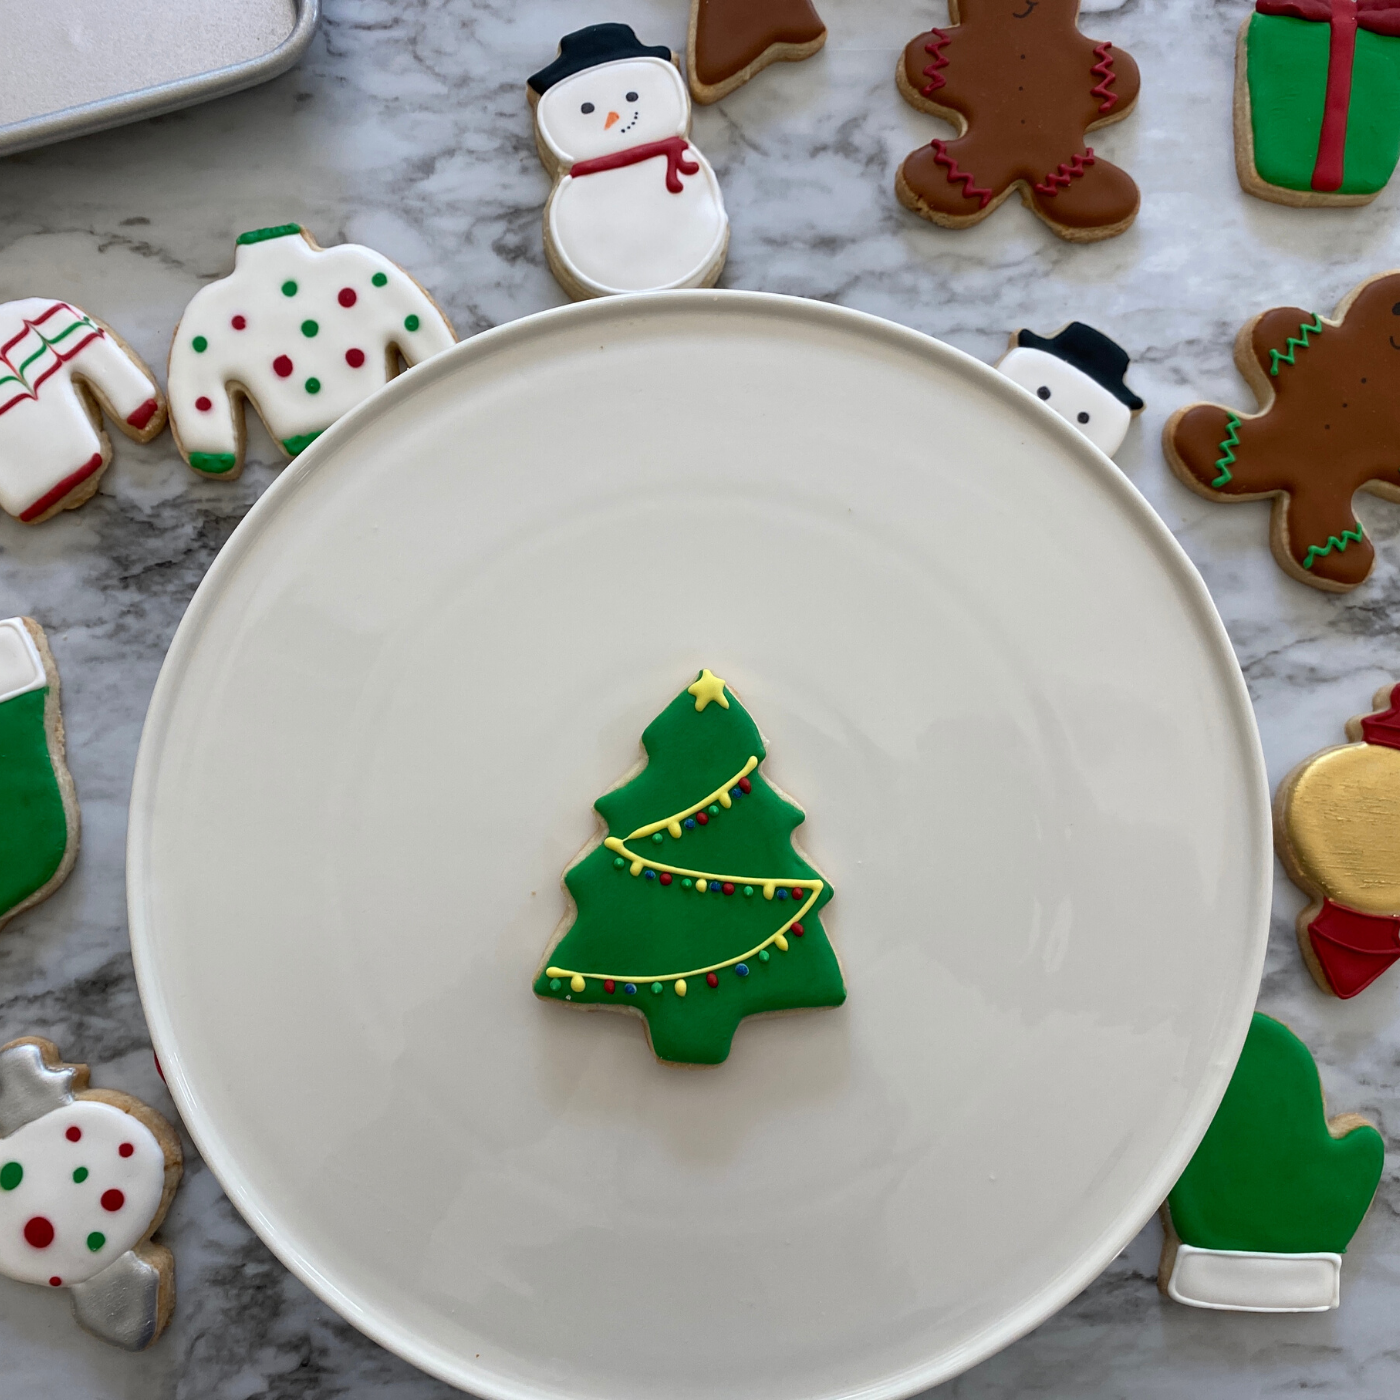 Lifestyle image of a decorated tree shaped cookie 